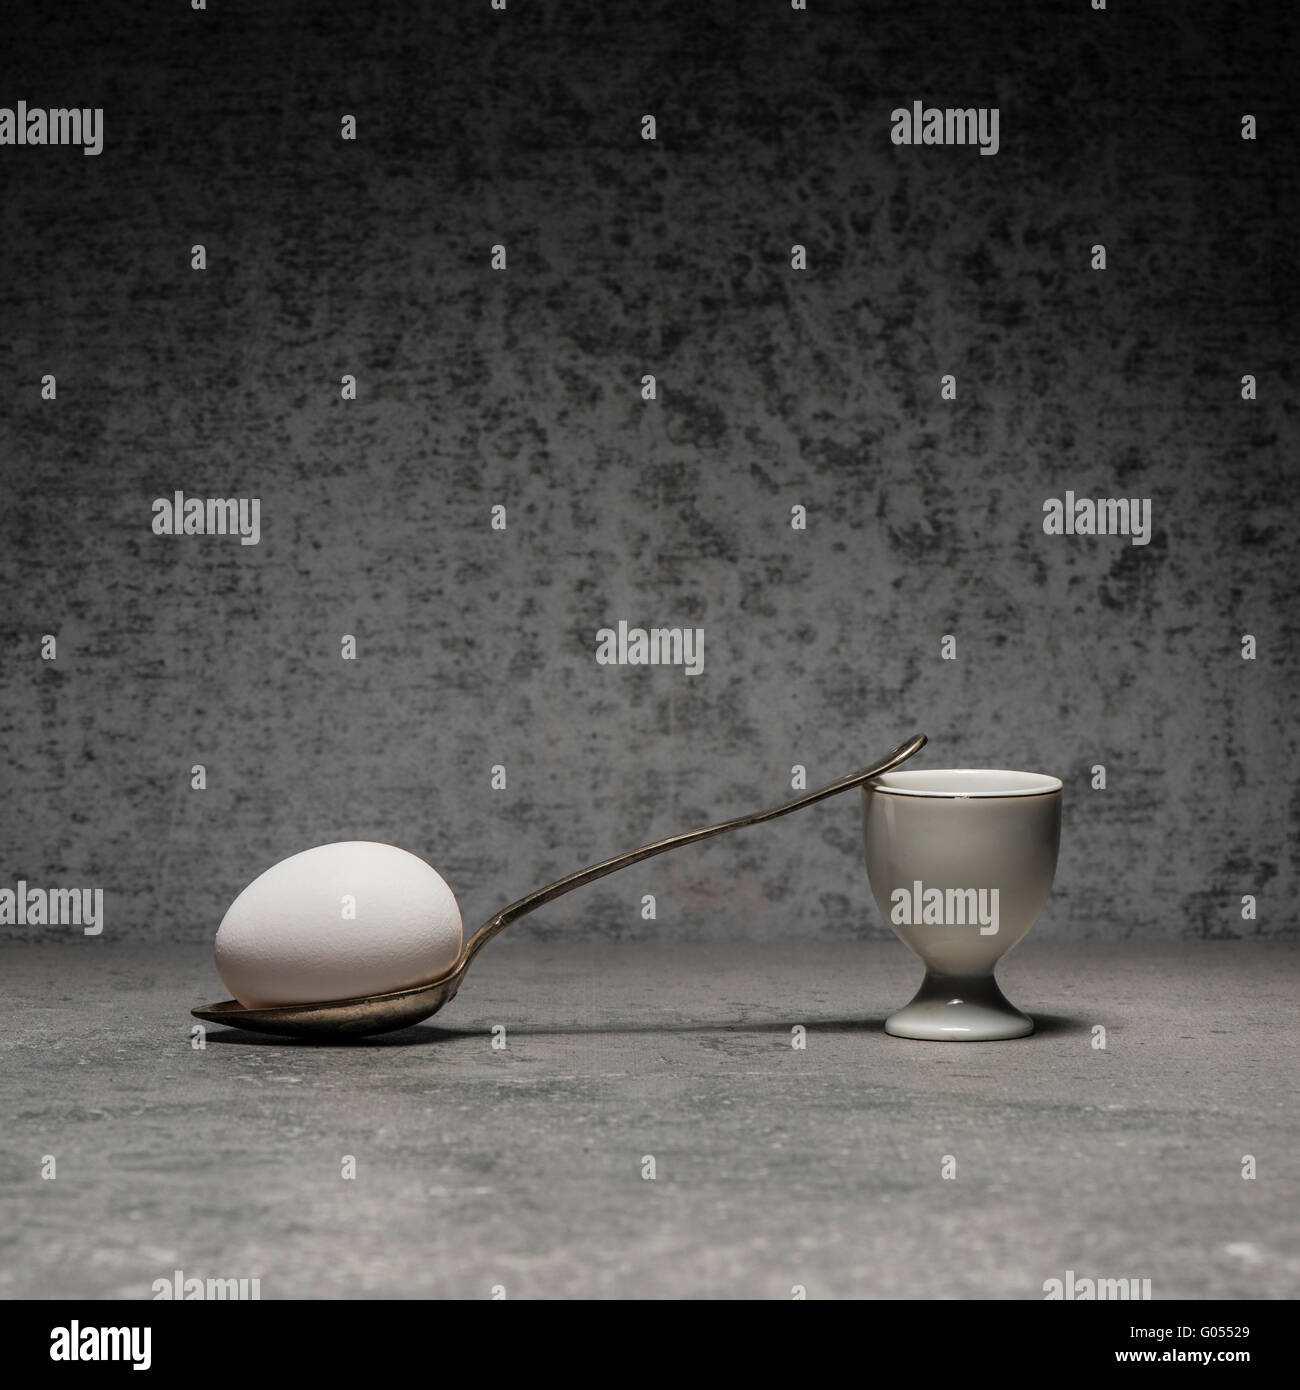 Egg, eggcup and spoon still life. Conceptual image with simplicity and copy space. Breakfast meal on stone table. Stock Photo